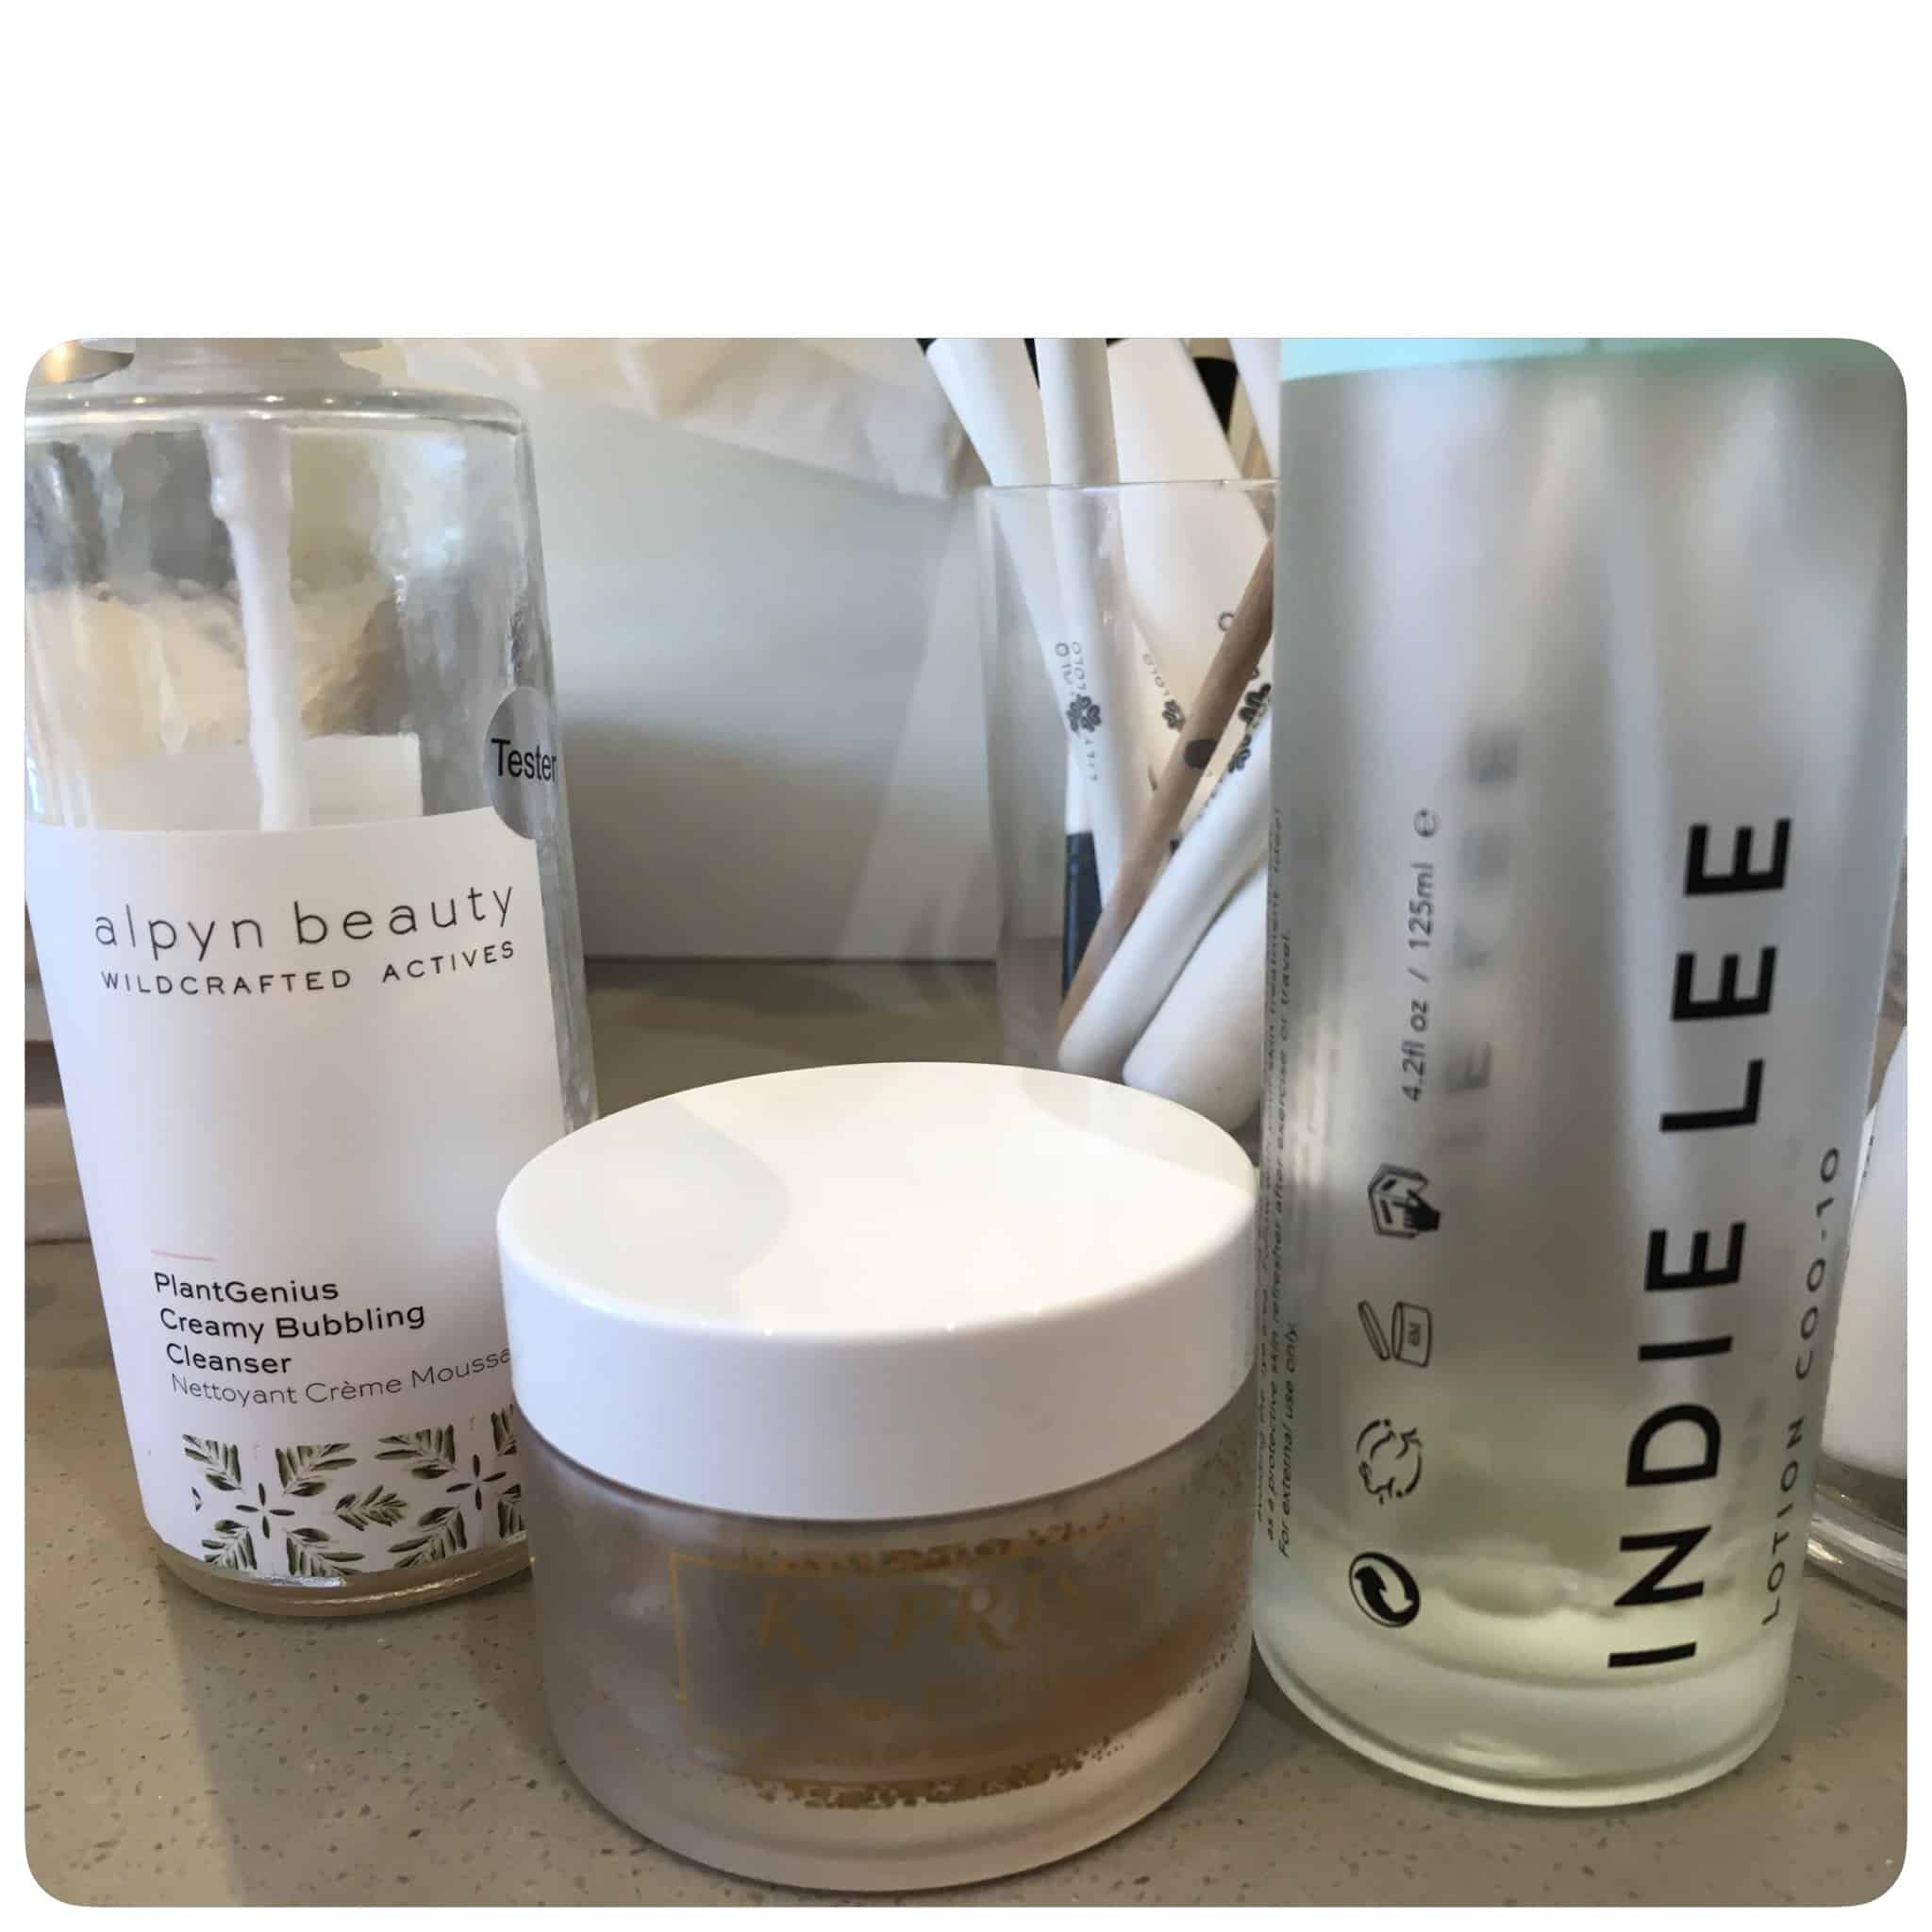 Wellness Wednesday: Pre Makeup Application Skin Care by Aillea